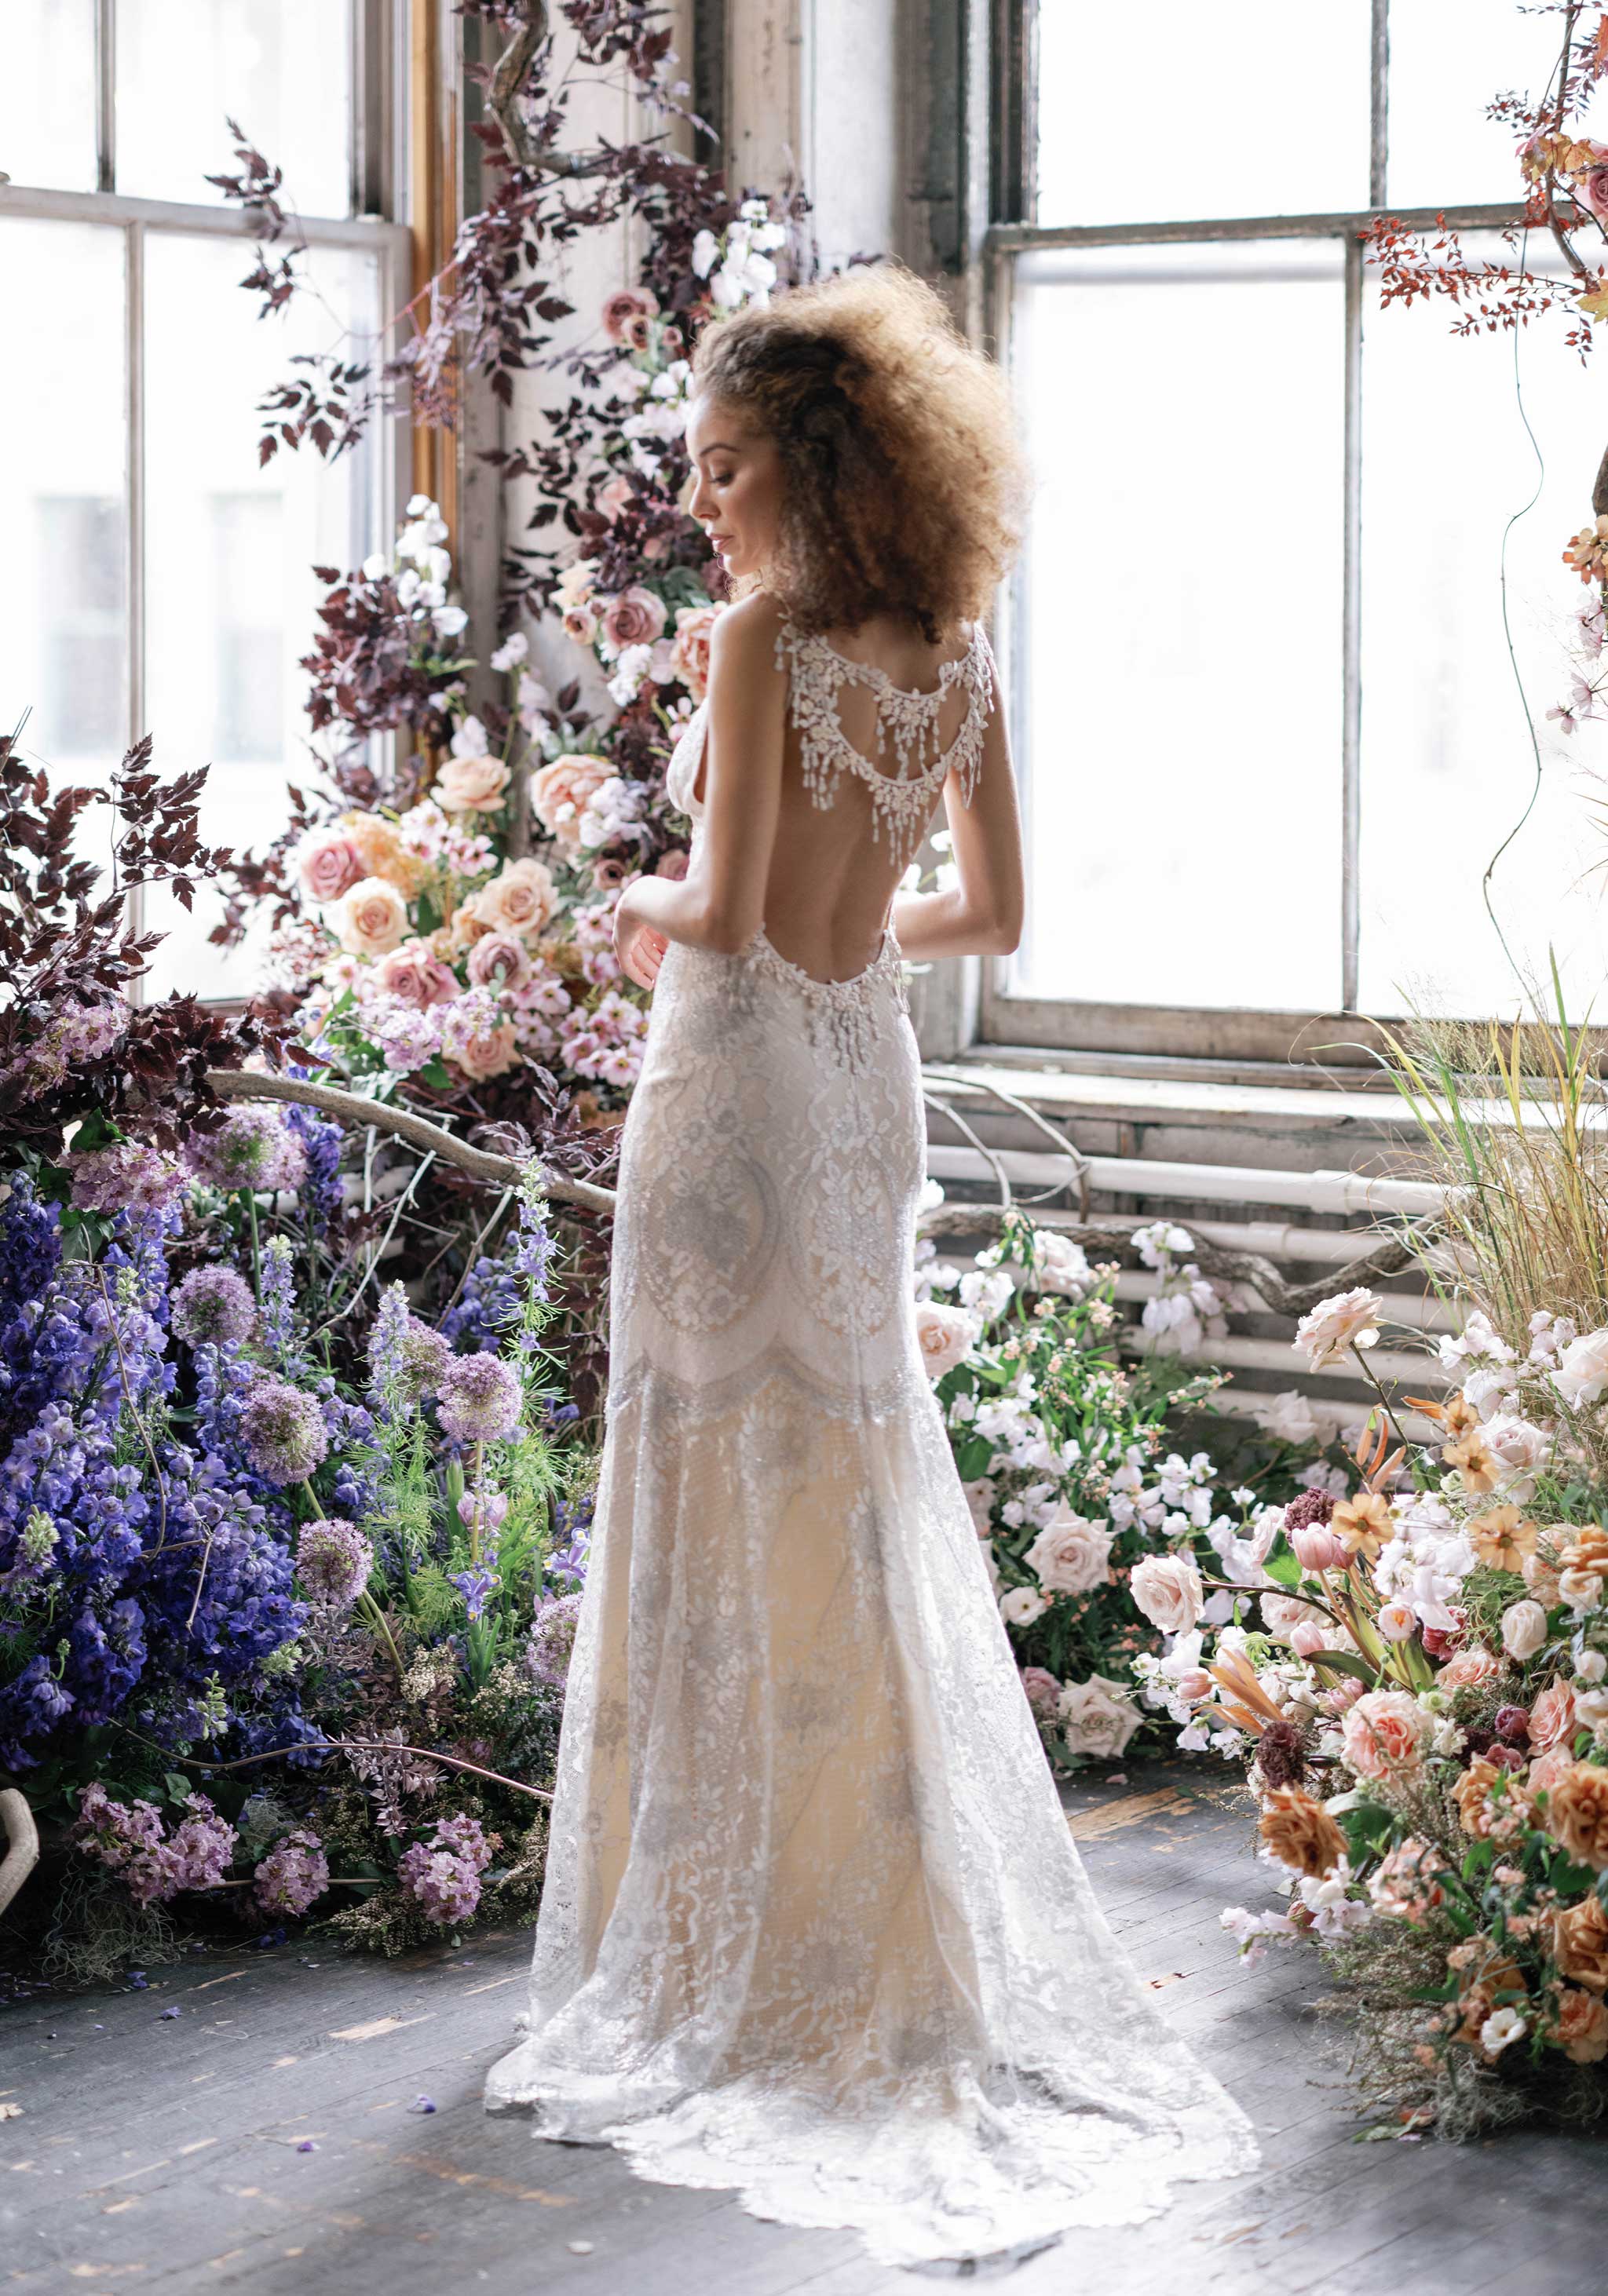 Low and open back lace wedding dress sheath style silhouette from Claire Pettibone